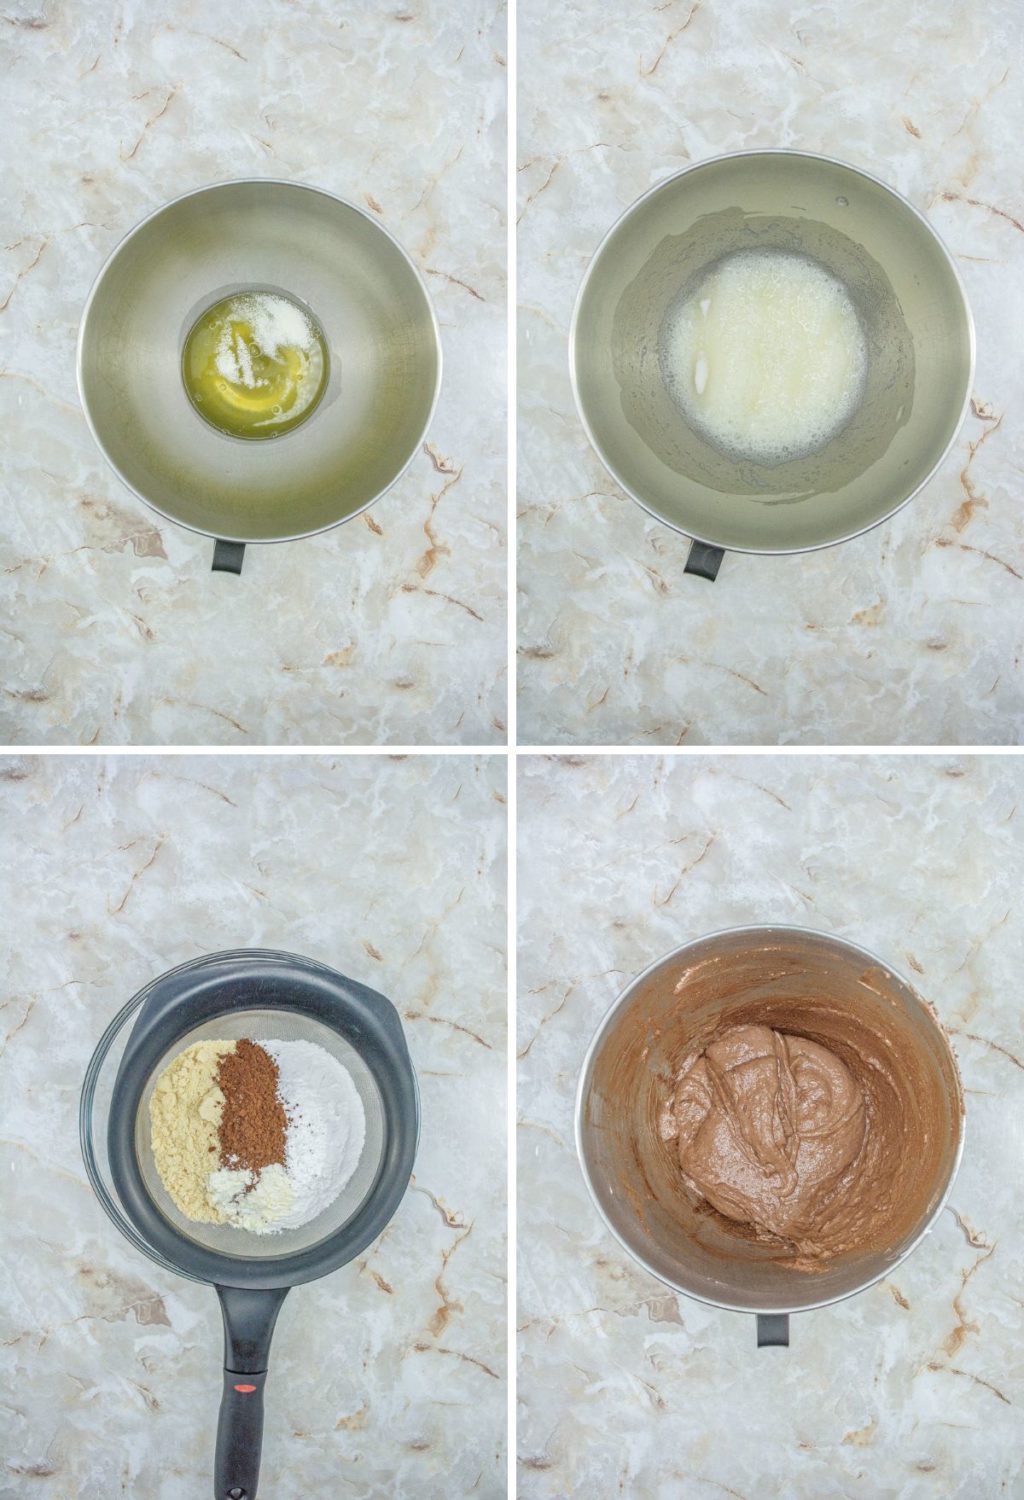 Four pictures showing how to make chocolate mousse.